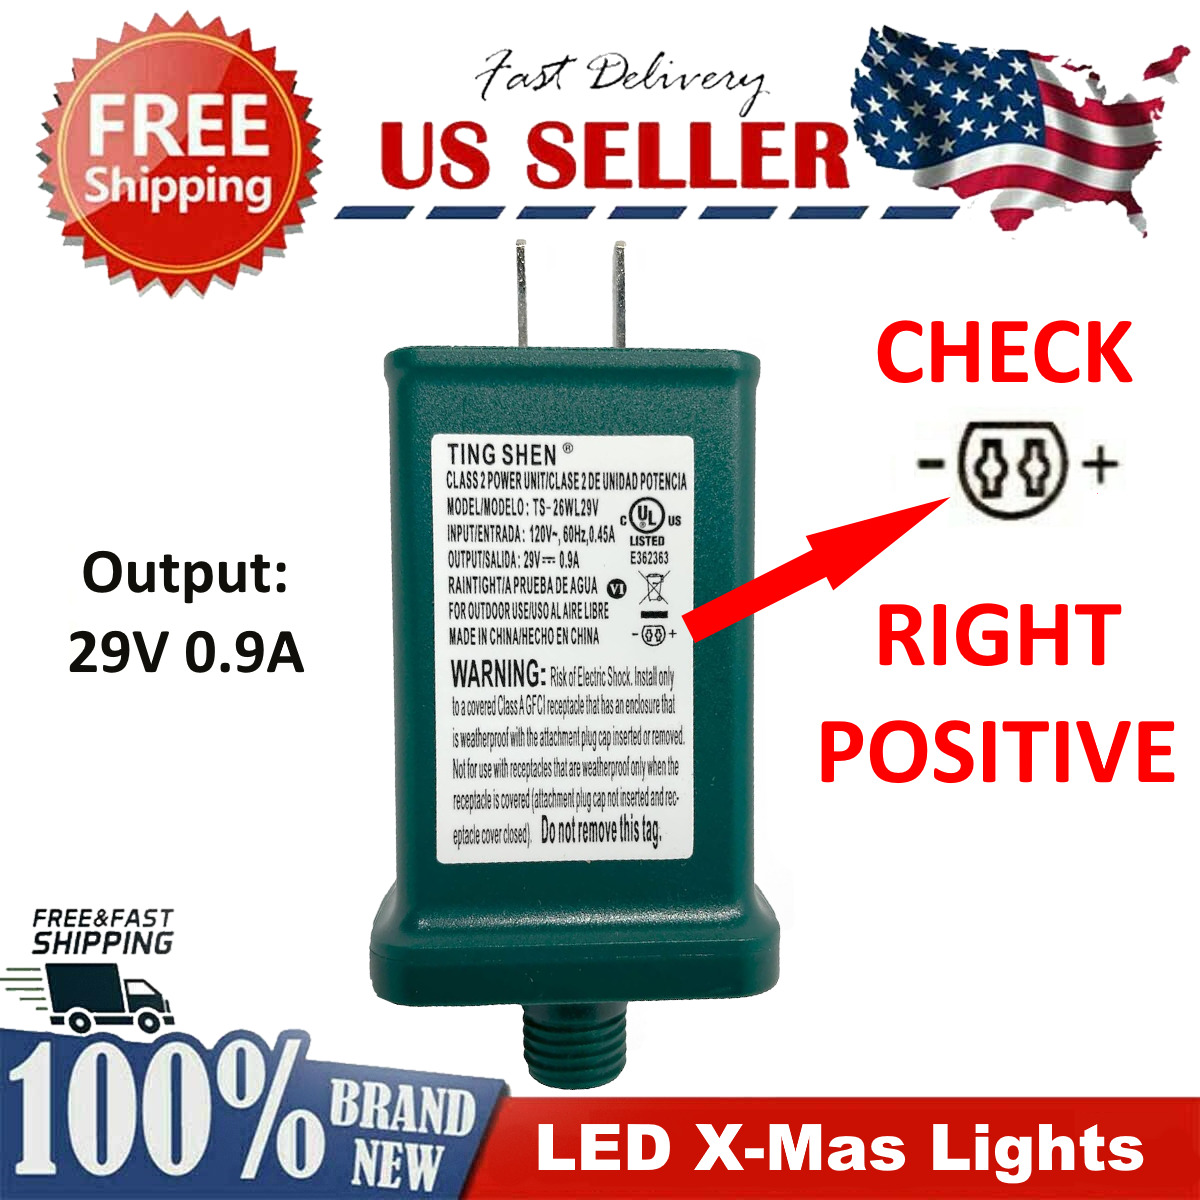 Replacement Power Adapter for LED Xmas Tree Lights DC 29V 0.9A - TS-26WL29V